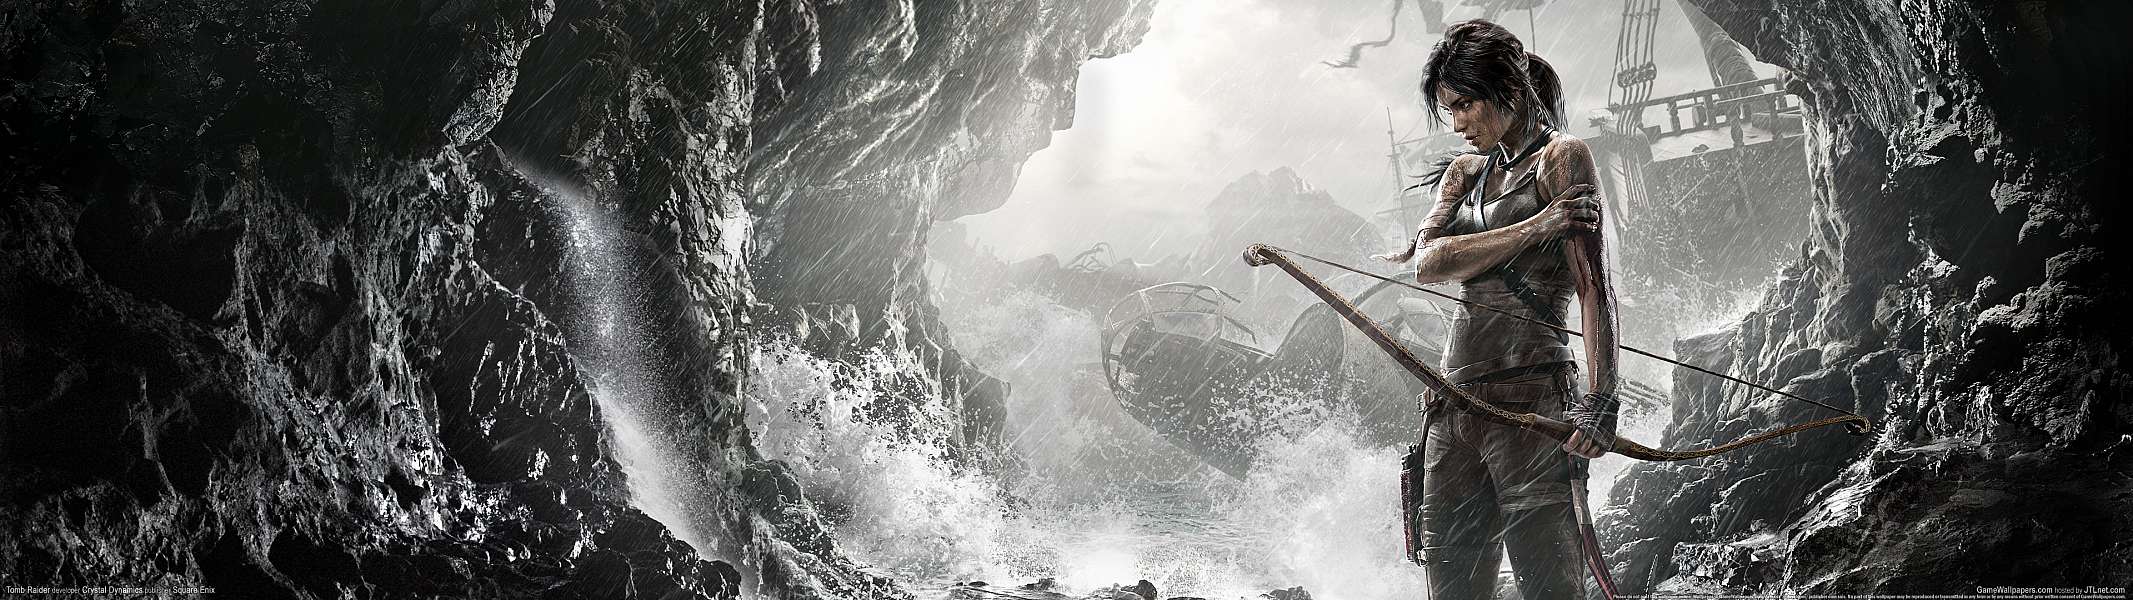 Tomb Raider dual screen wallpaper or background